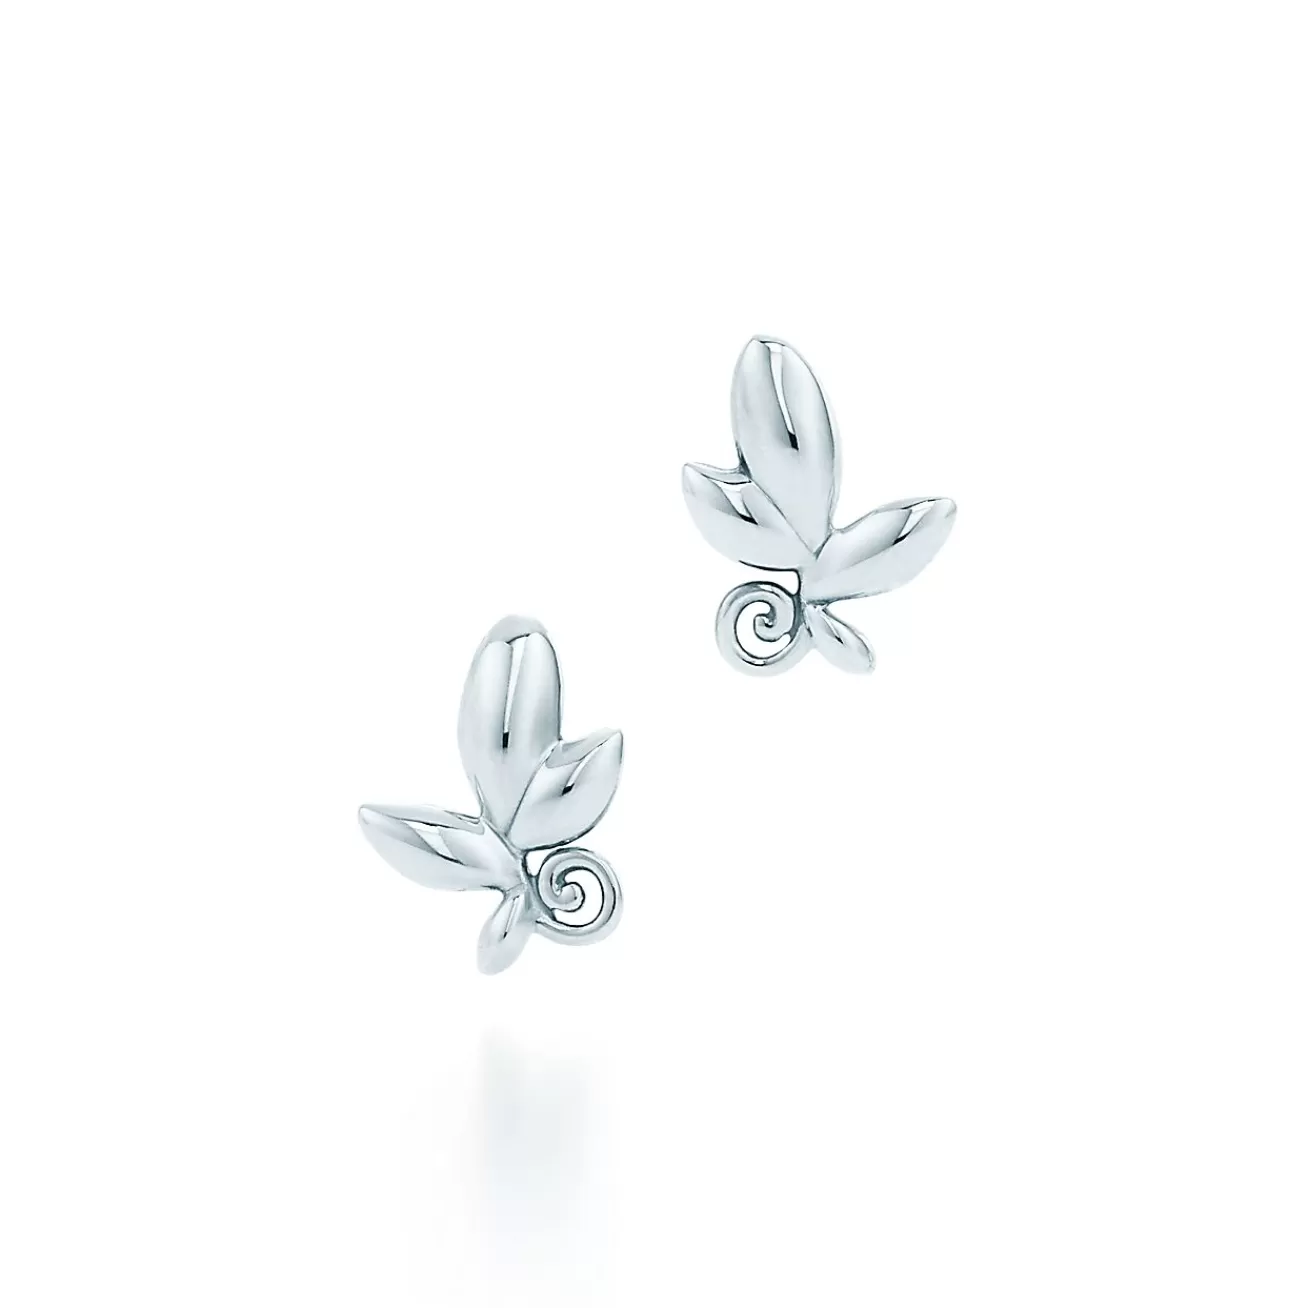 Tiffany & Co. Paloma Picasso® Olive Leaf earrings in sterling silver. | ^ Earrings | Sterling Silver Jewelry